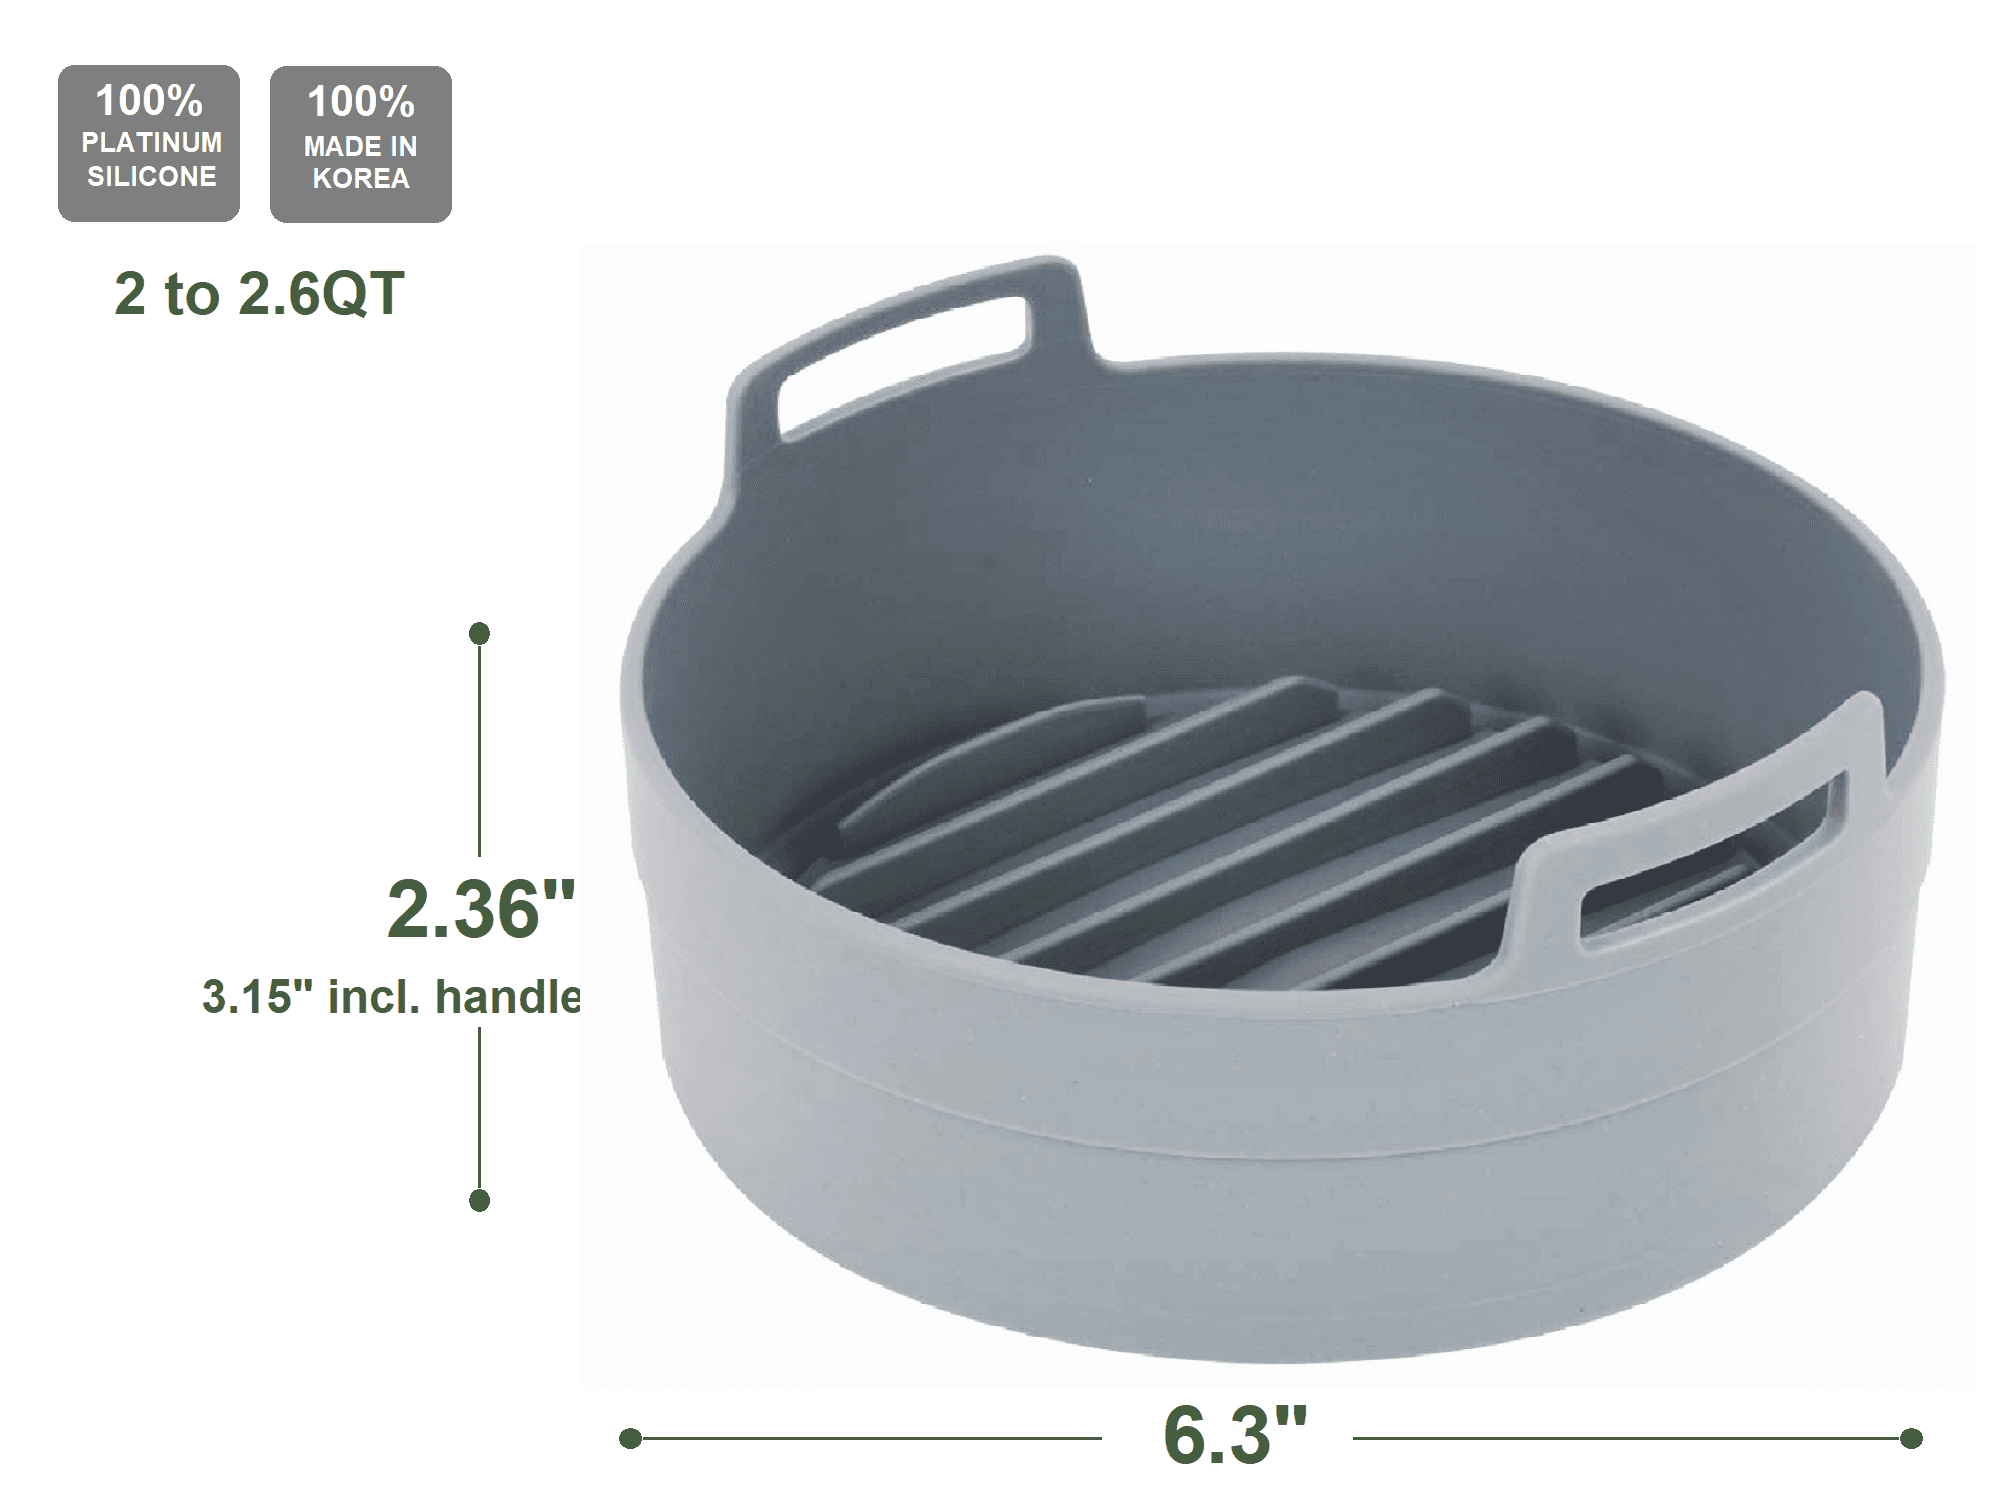 This made-in-Korea Silicone Pot for your Air Fryer is the perfect